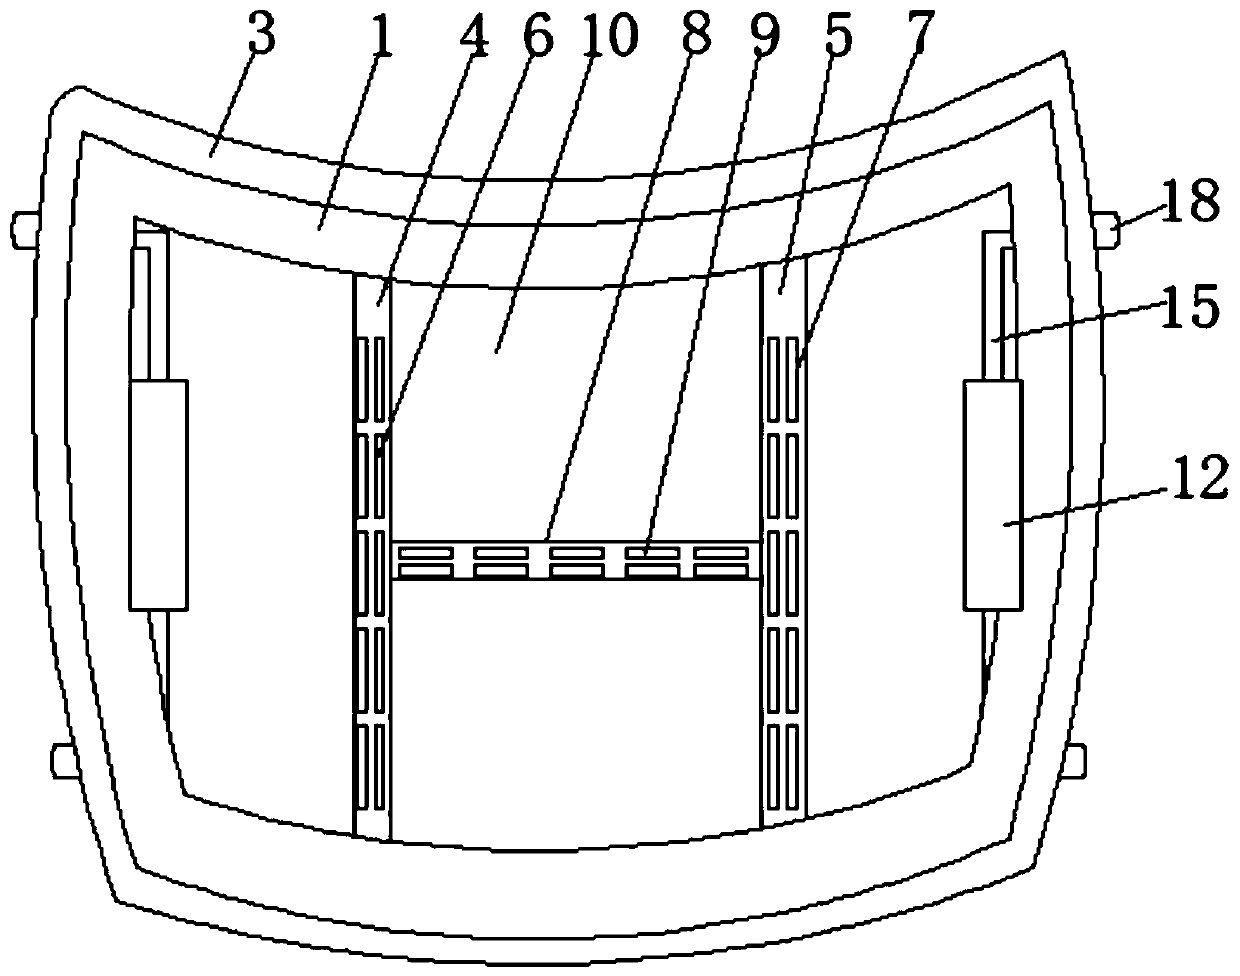 Buffer structure of automobile engine hood